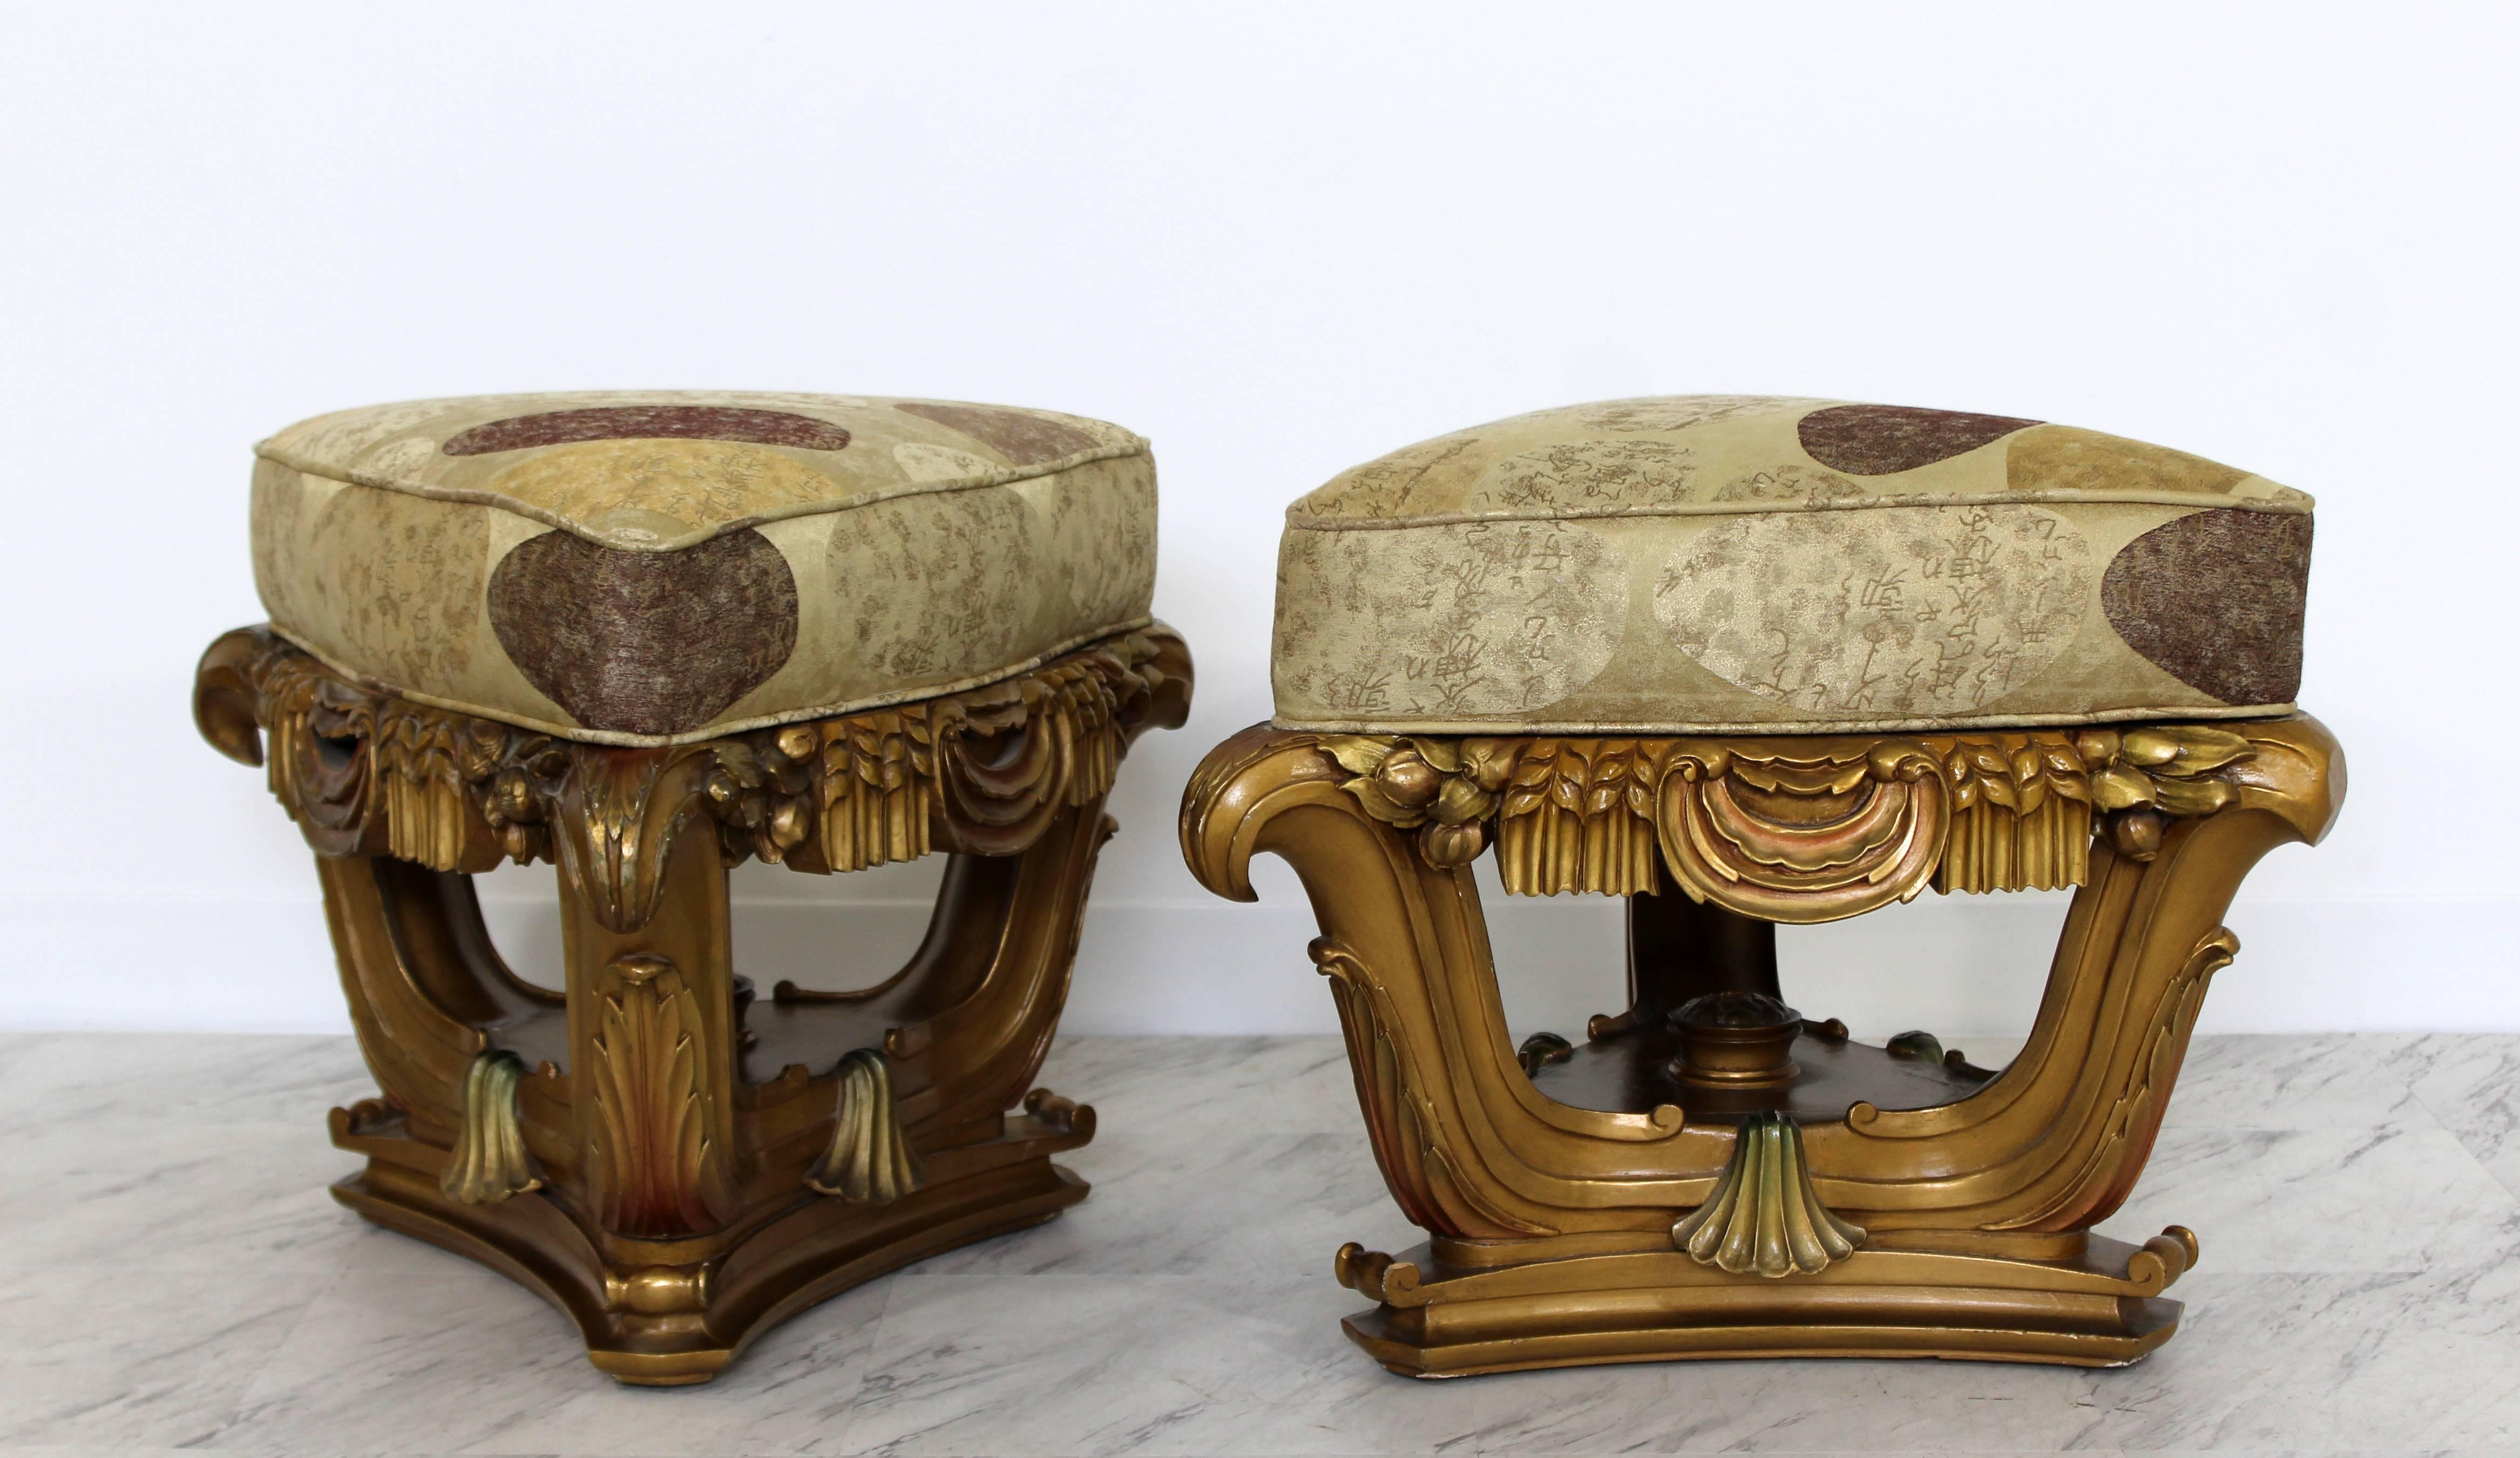 For your consideration is a magnificent pair of Art Deco, Italian, gold gilt tabourets or foot stools, signed on the bottom Mascheroni. Just back from being professionally reupholstered. In excellent condition. The dimensions of each are 23